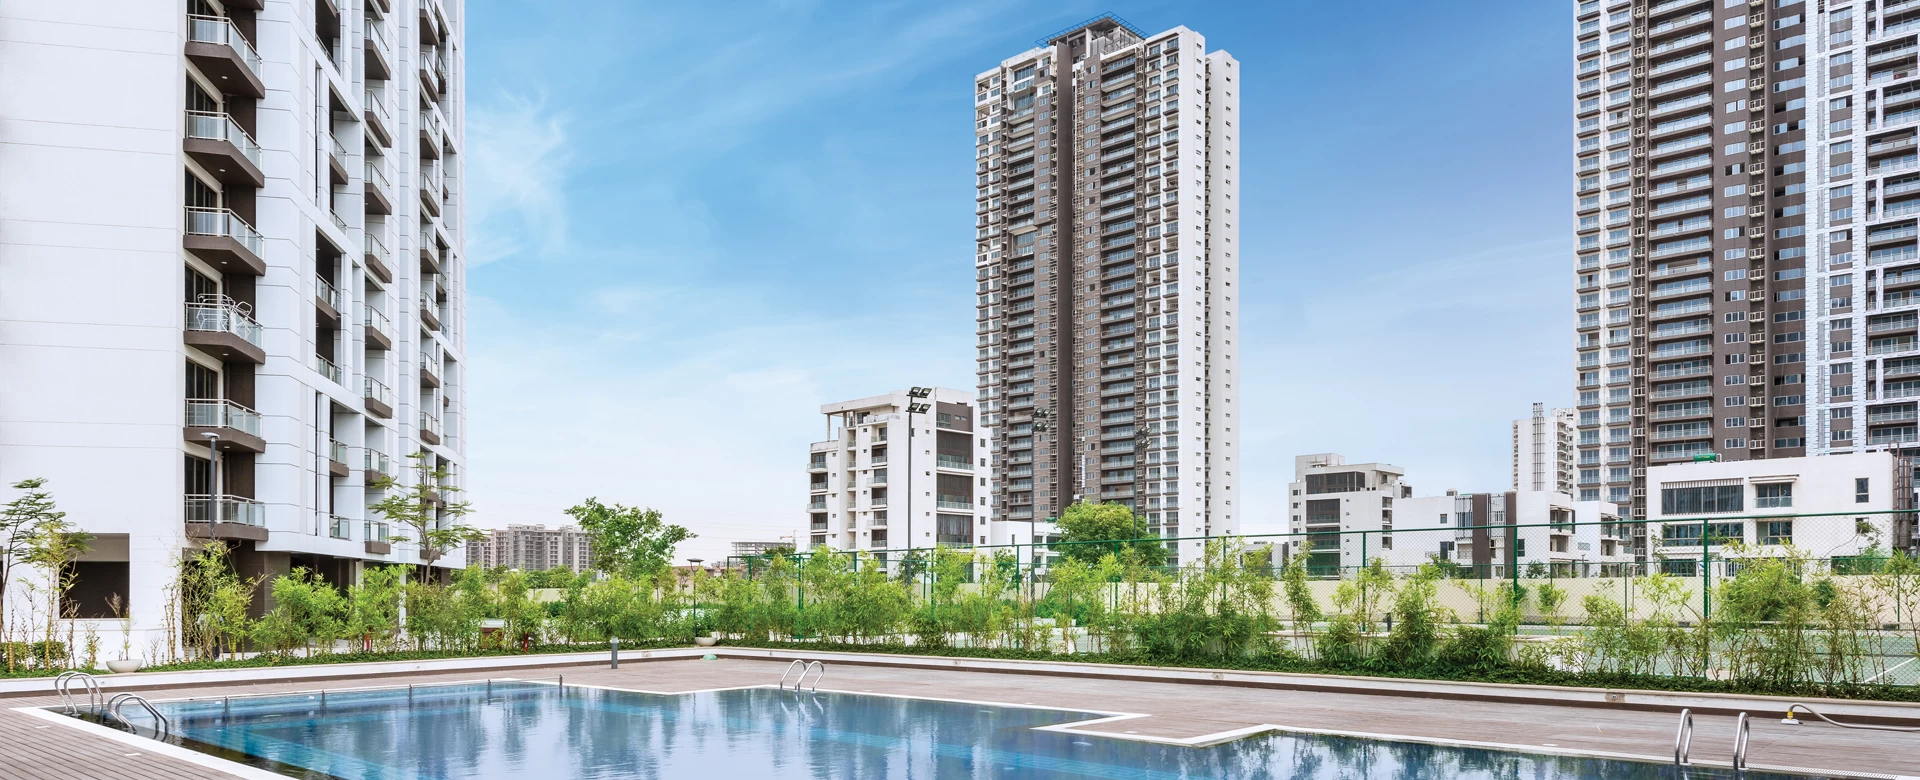 Tata Primanti Sector 72 Haven of Luxury and Comfort Awaits